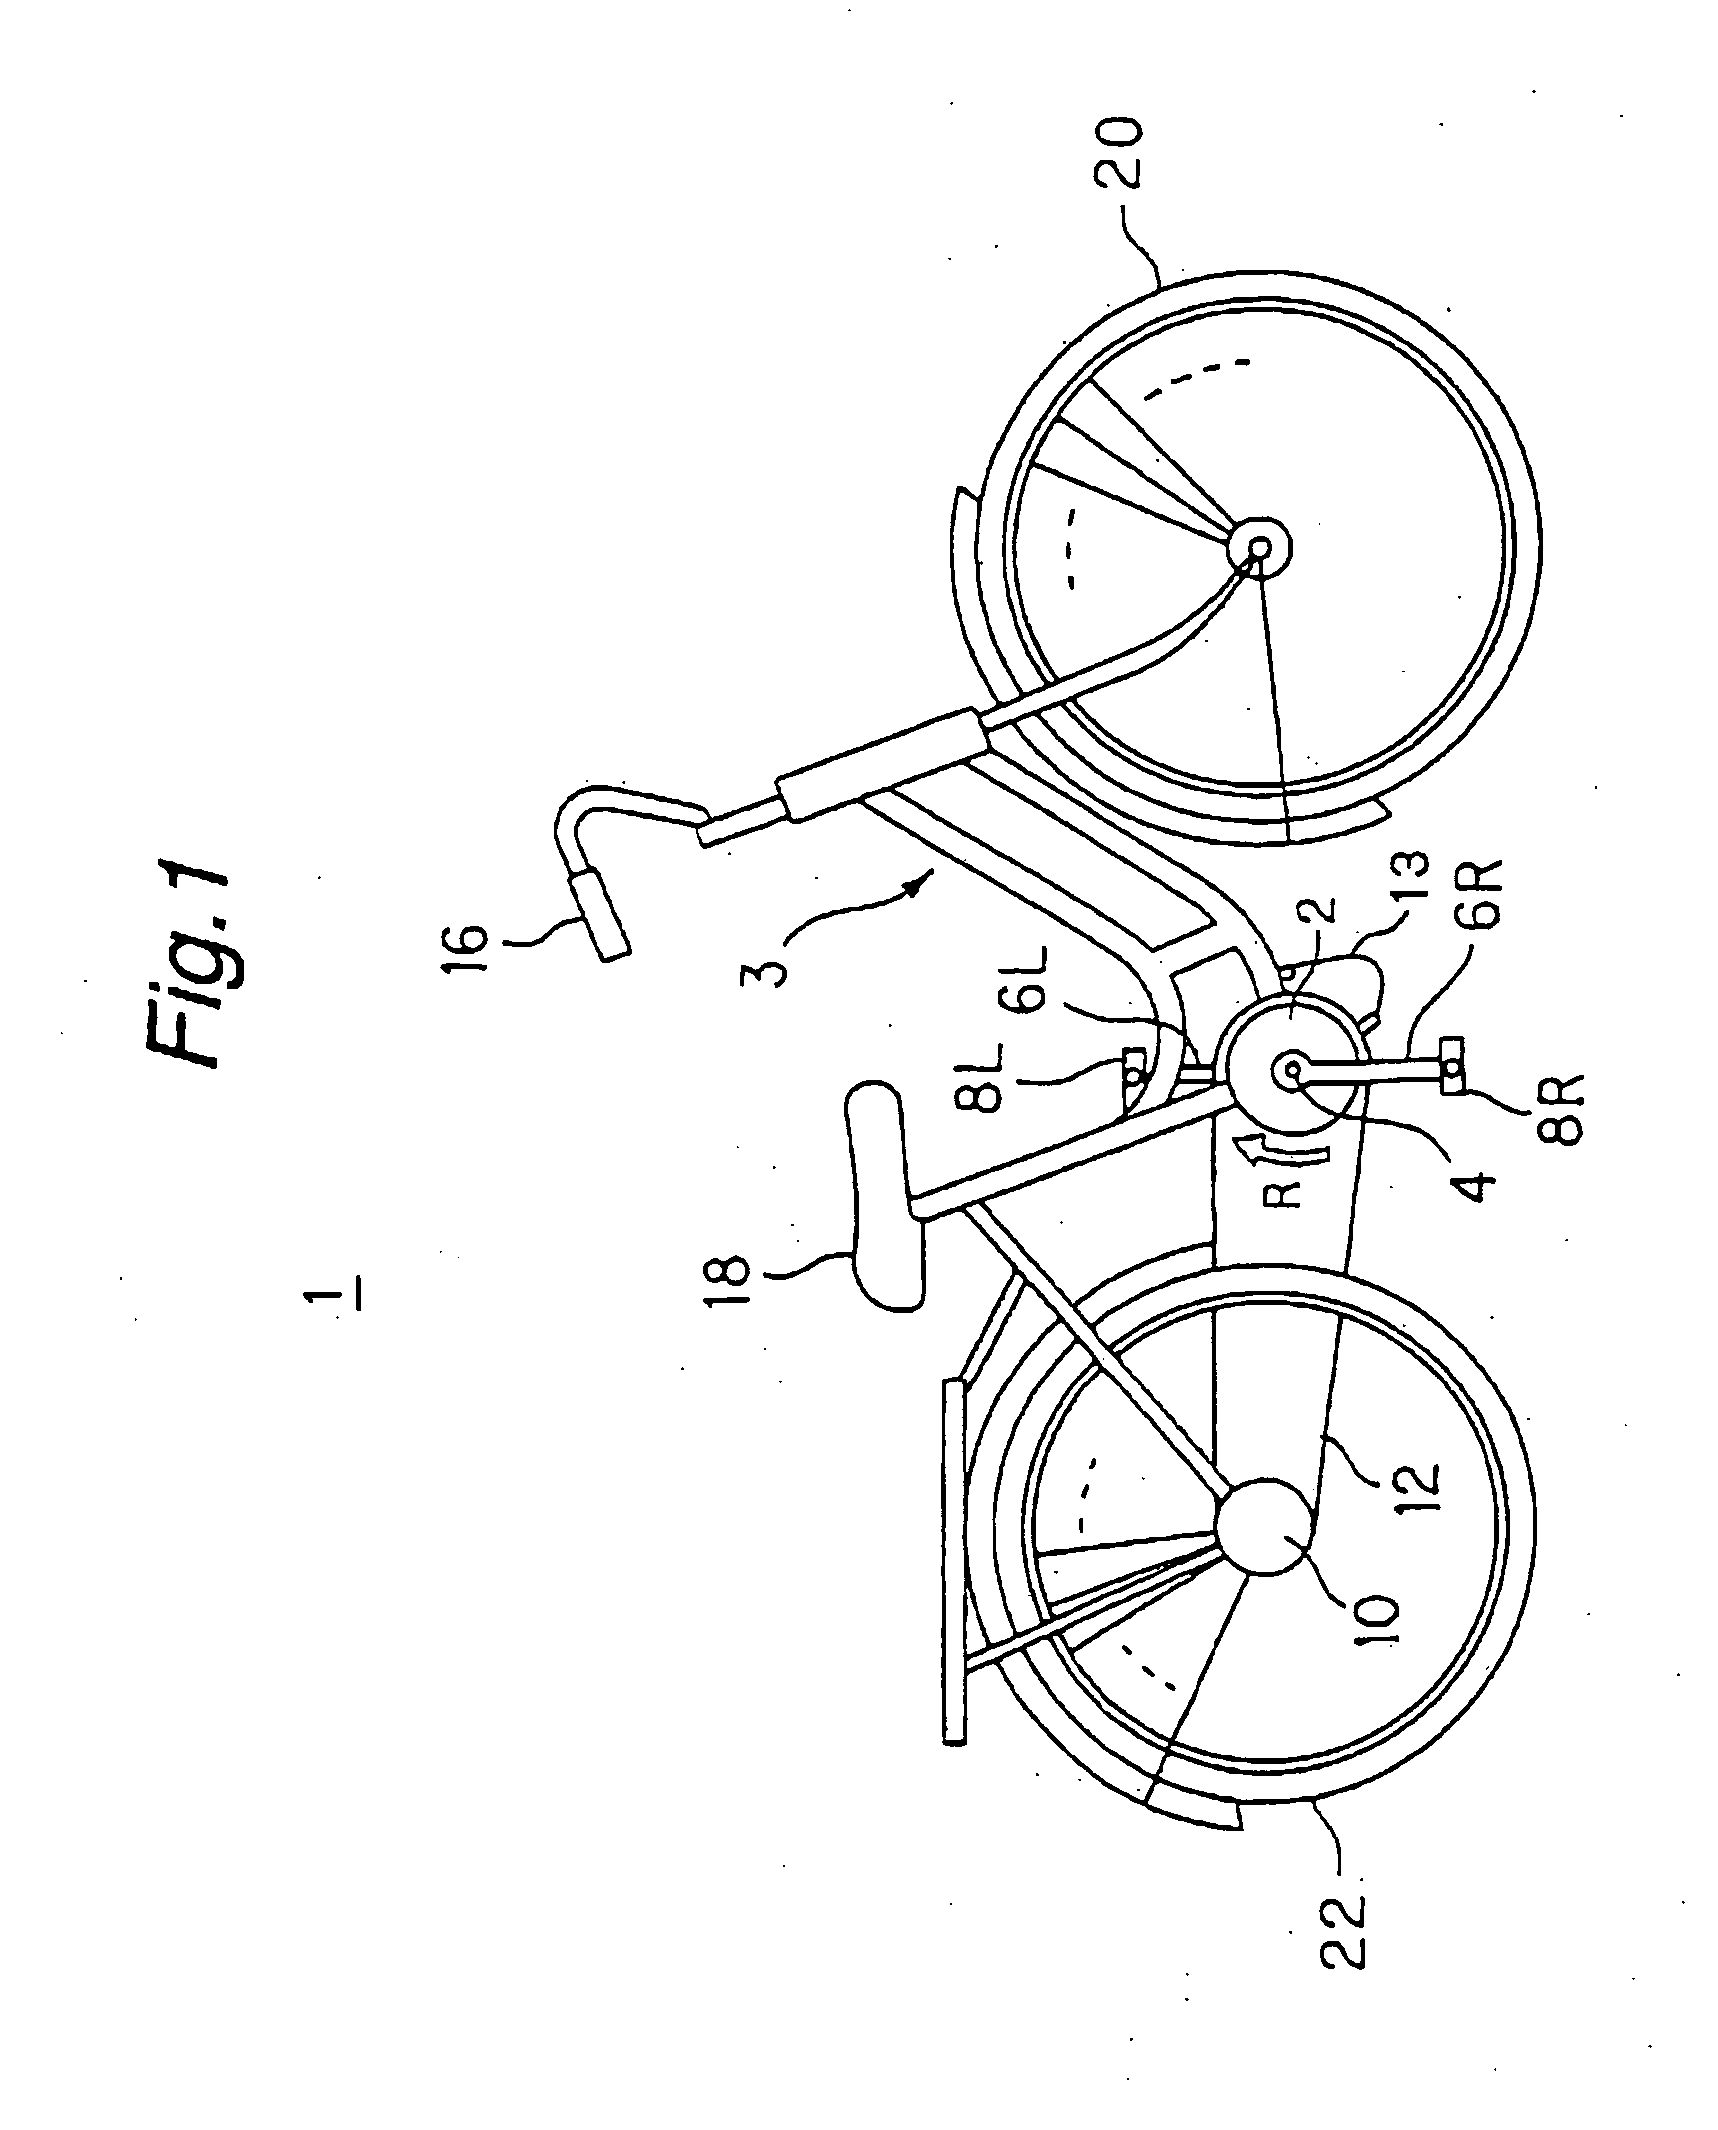 Electrically assisted bicycle which enables aerobic exercise